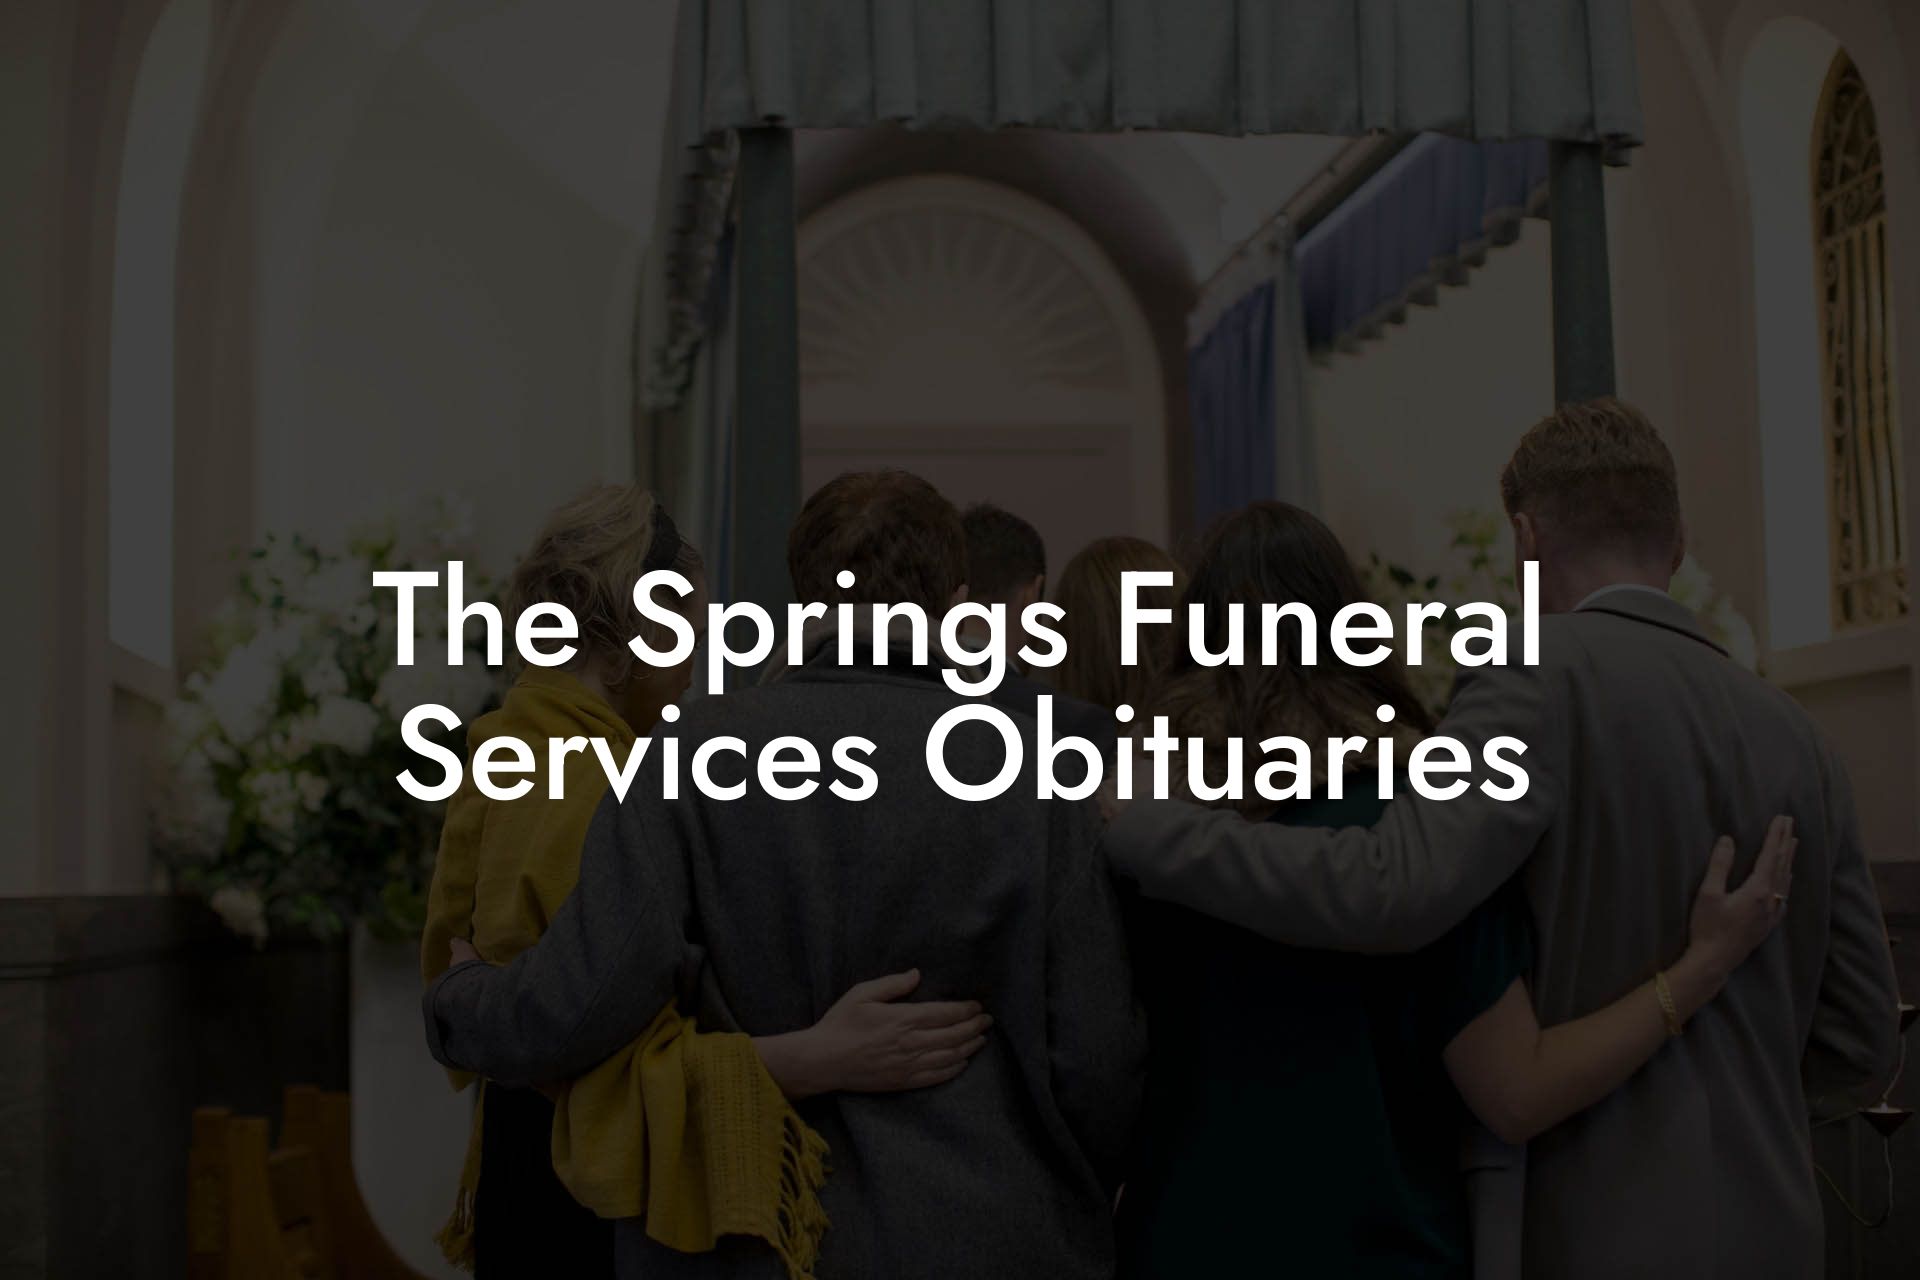 The Springs Funeral Services Obituaries